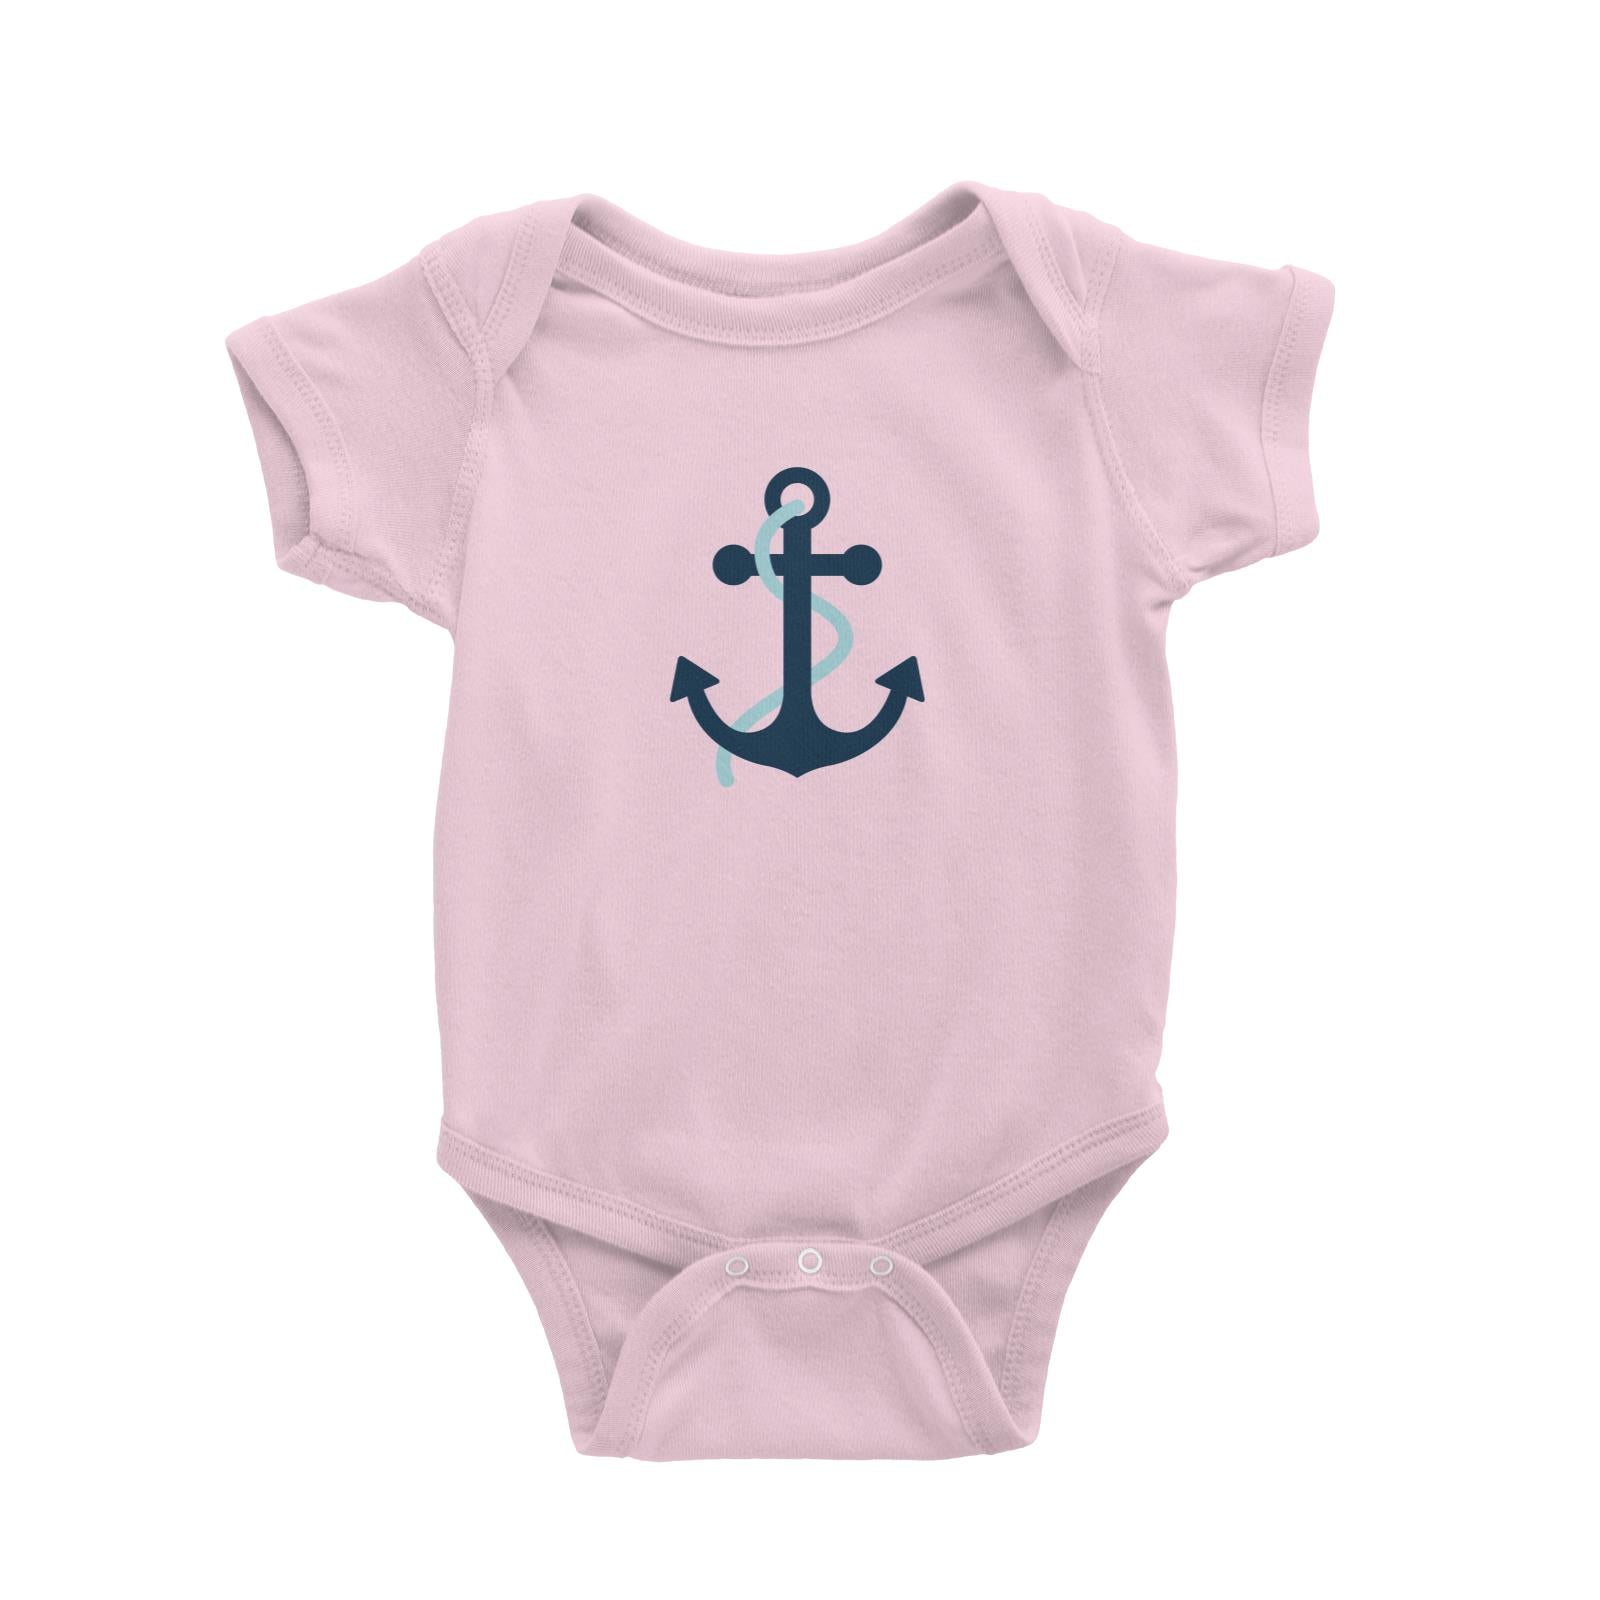 Sailor Anchor Blue Baby Romper  Matching Family Personalizable Designs